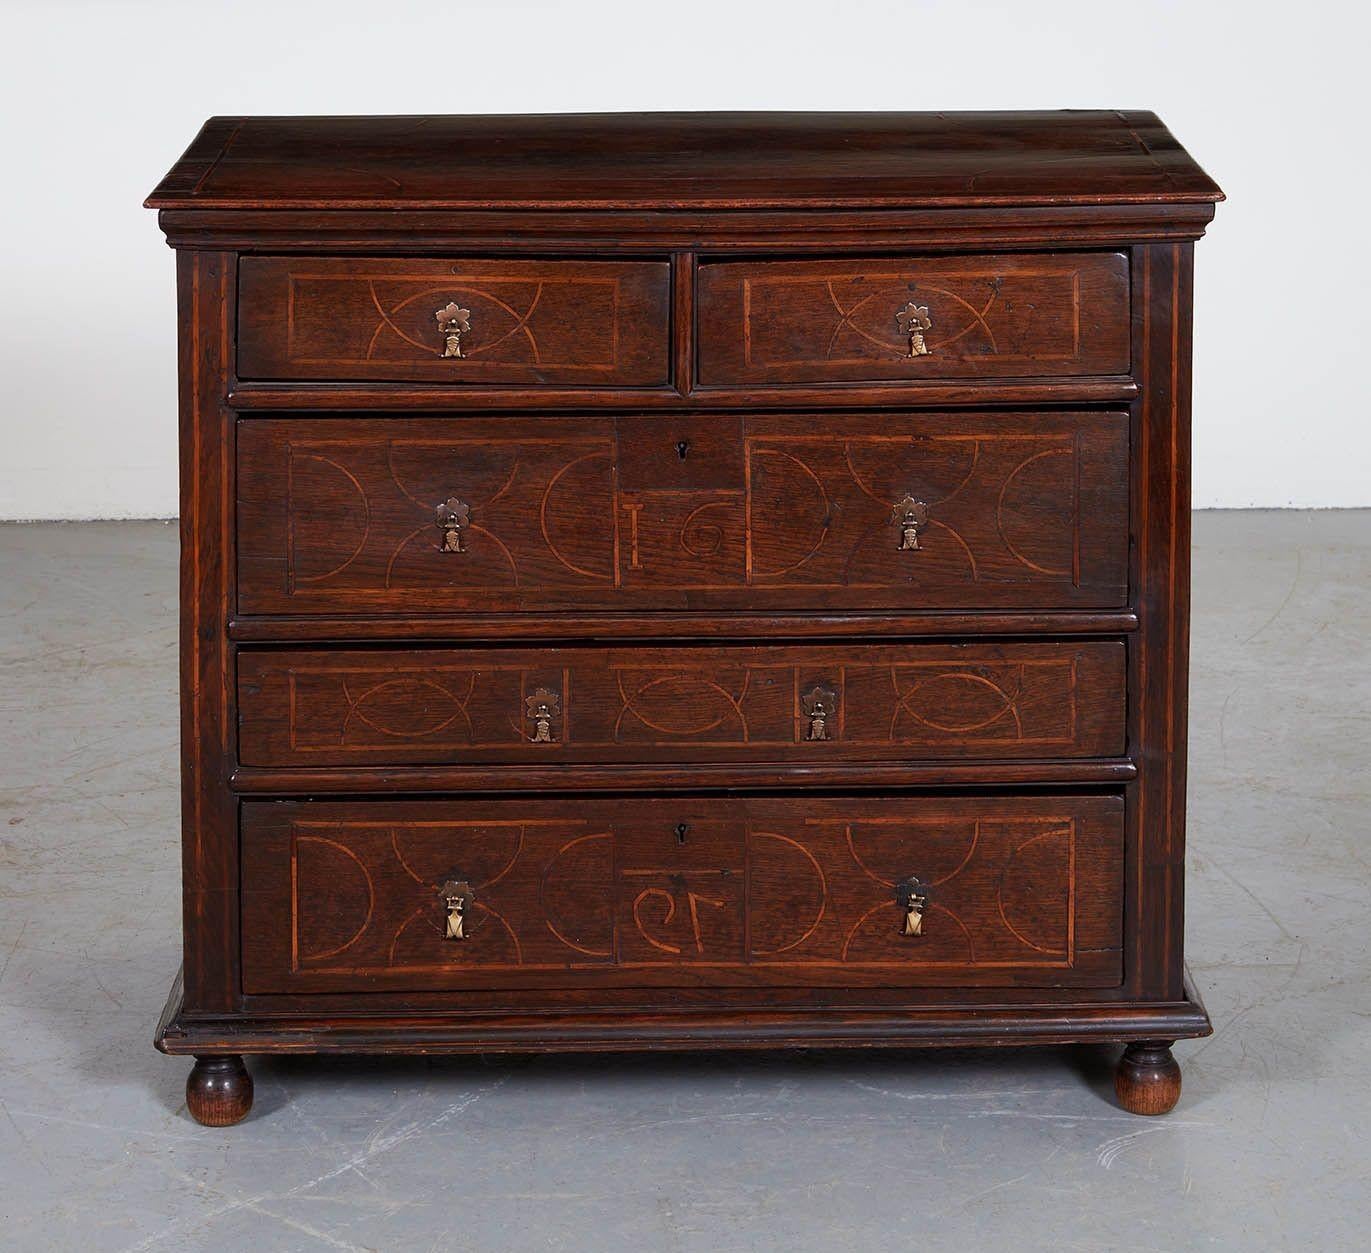 A 17th century oak chest of drawers dated 1679, having wonderful string inlaid lines and bands, with two short top drawers over three long drawers, each drawer separated by concave molding, having brass drop pulls. Inlaid side stiles and architrave